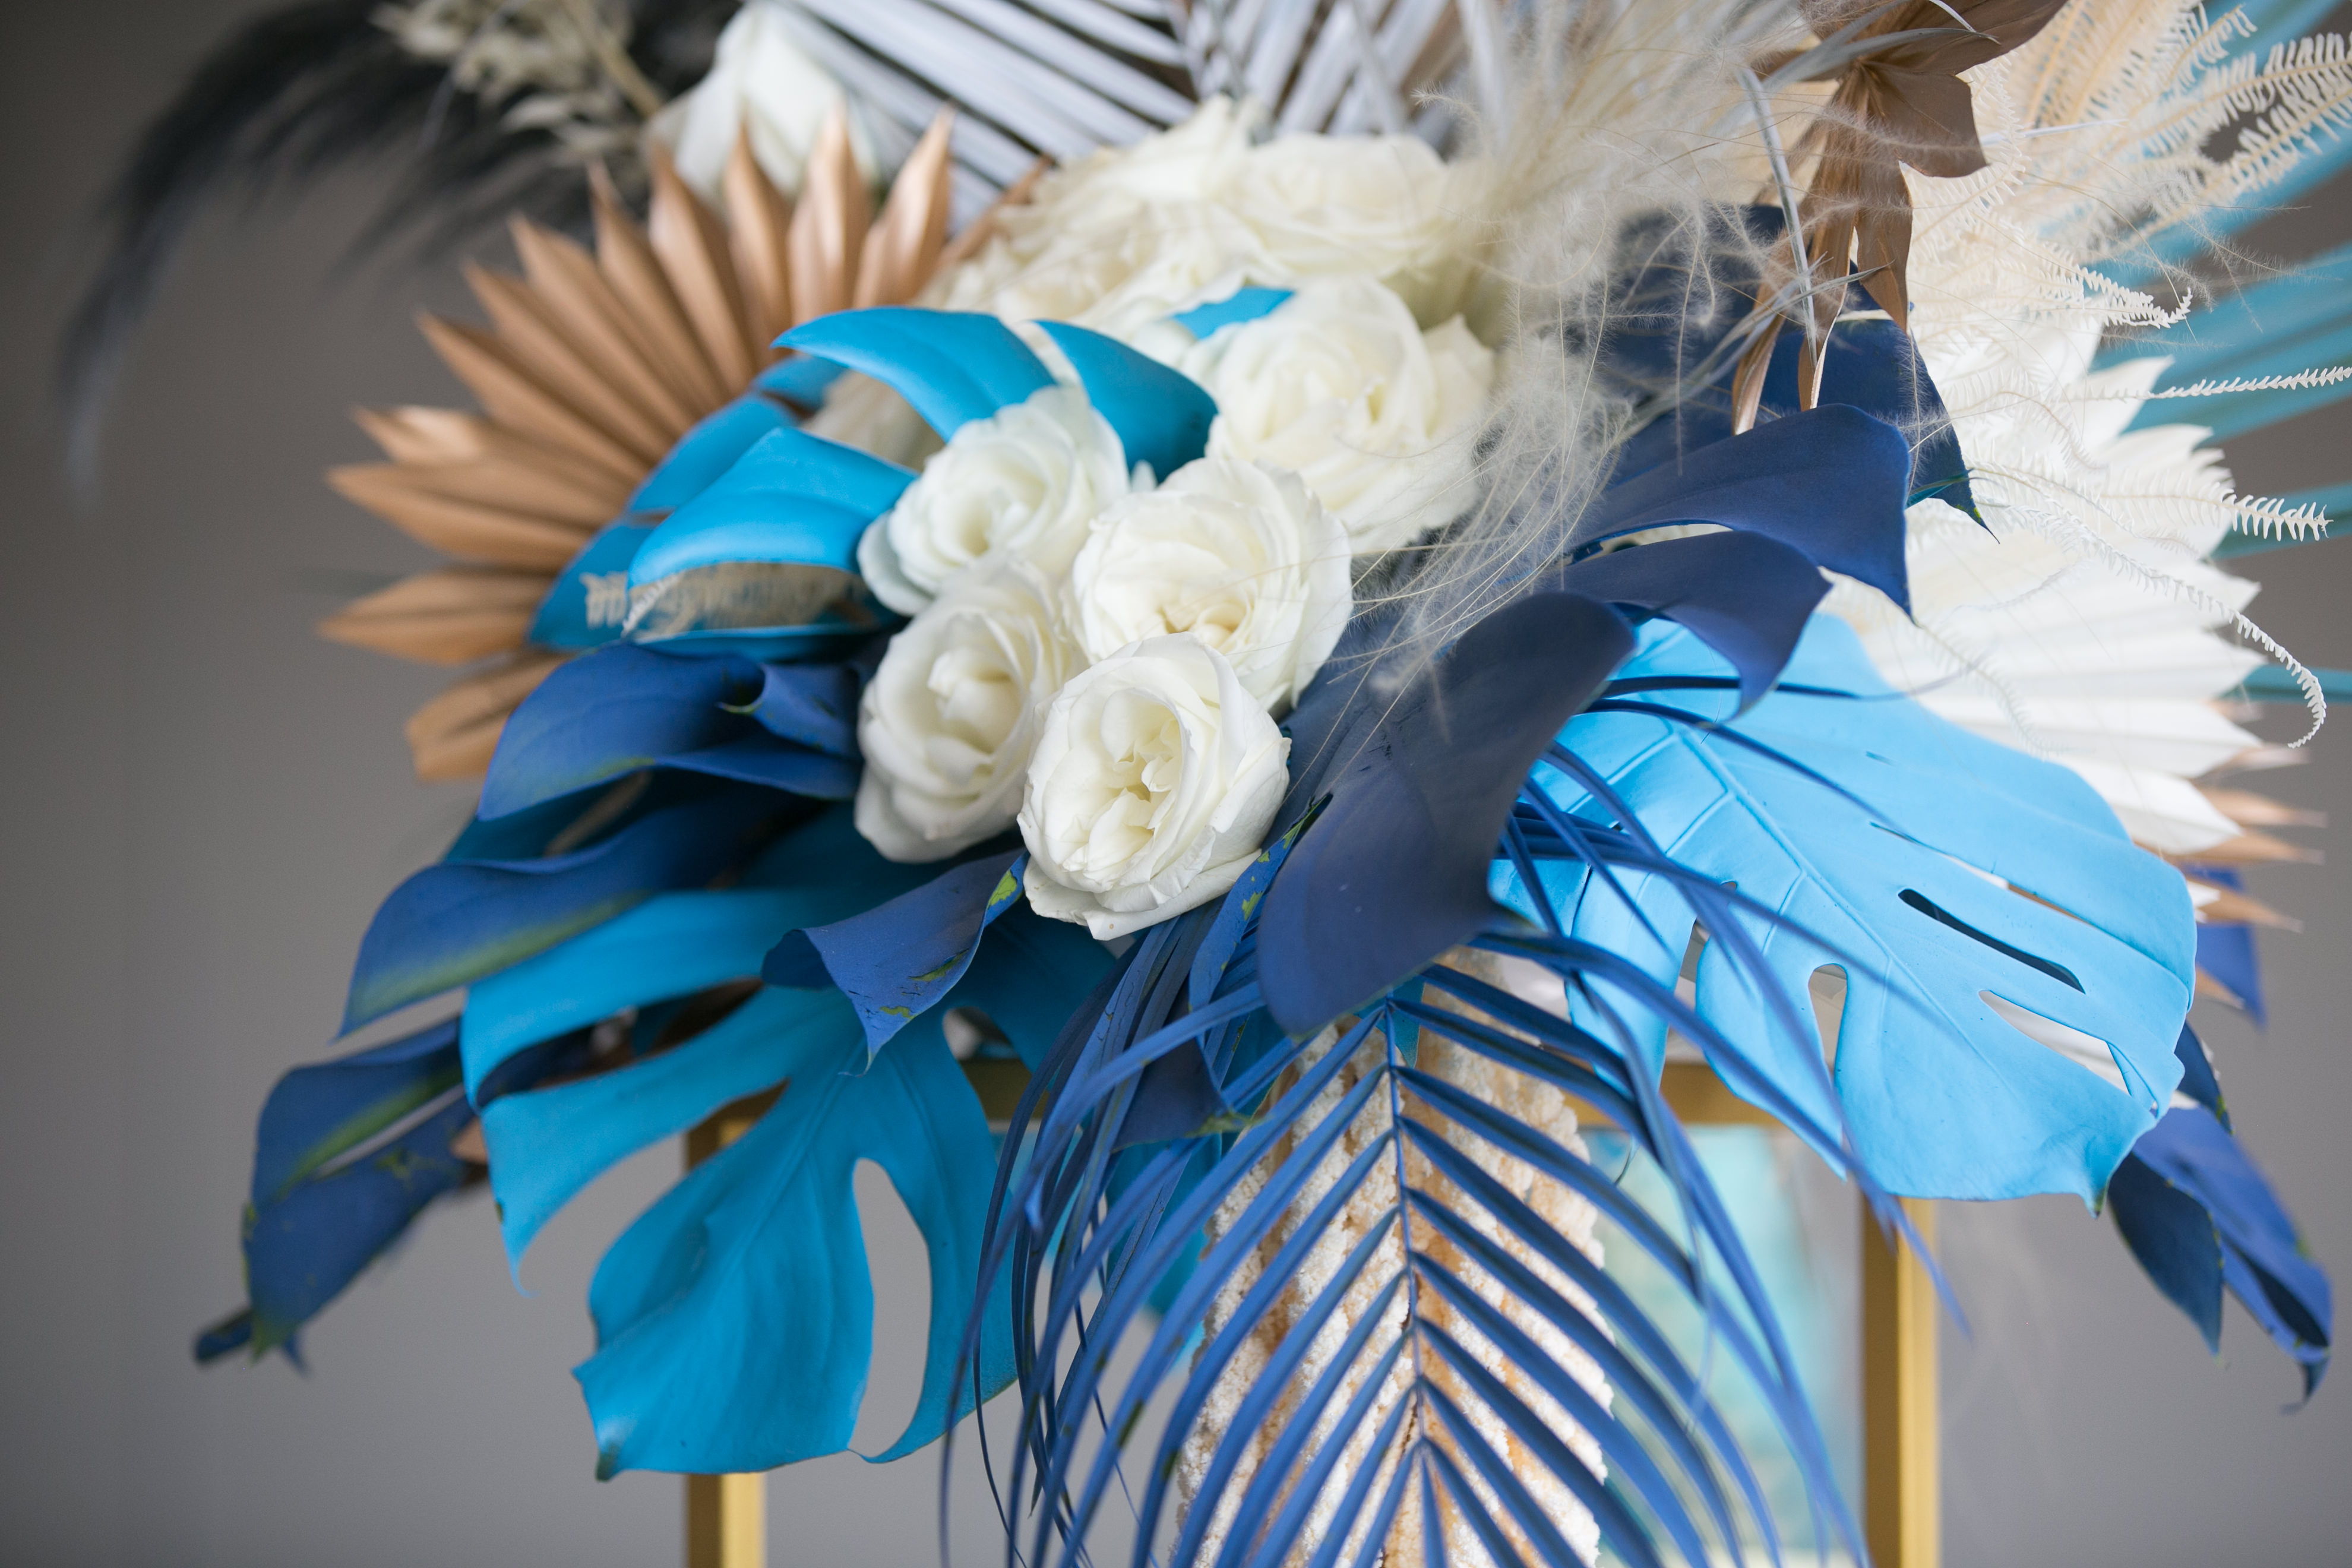 Whimsical Unique Wedding Reception Decor, Dusty Blue Monstera, Navy Blue Palm Tree Leaves, White Roses, Feathers and Gold Accents Floral Centerpiece | Tampa Wedding Planner and Florist John Campbell Weddings | Wedding Photographer Carrie Wildes Photography